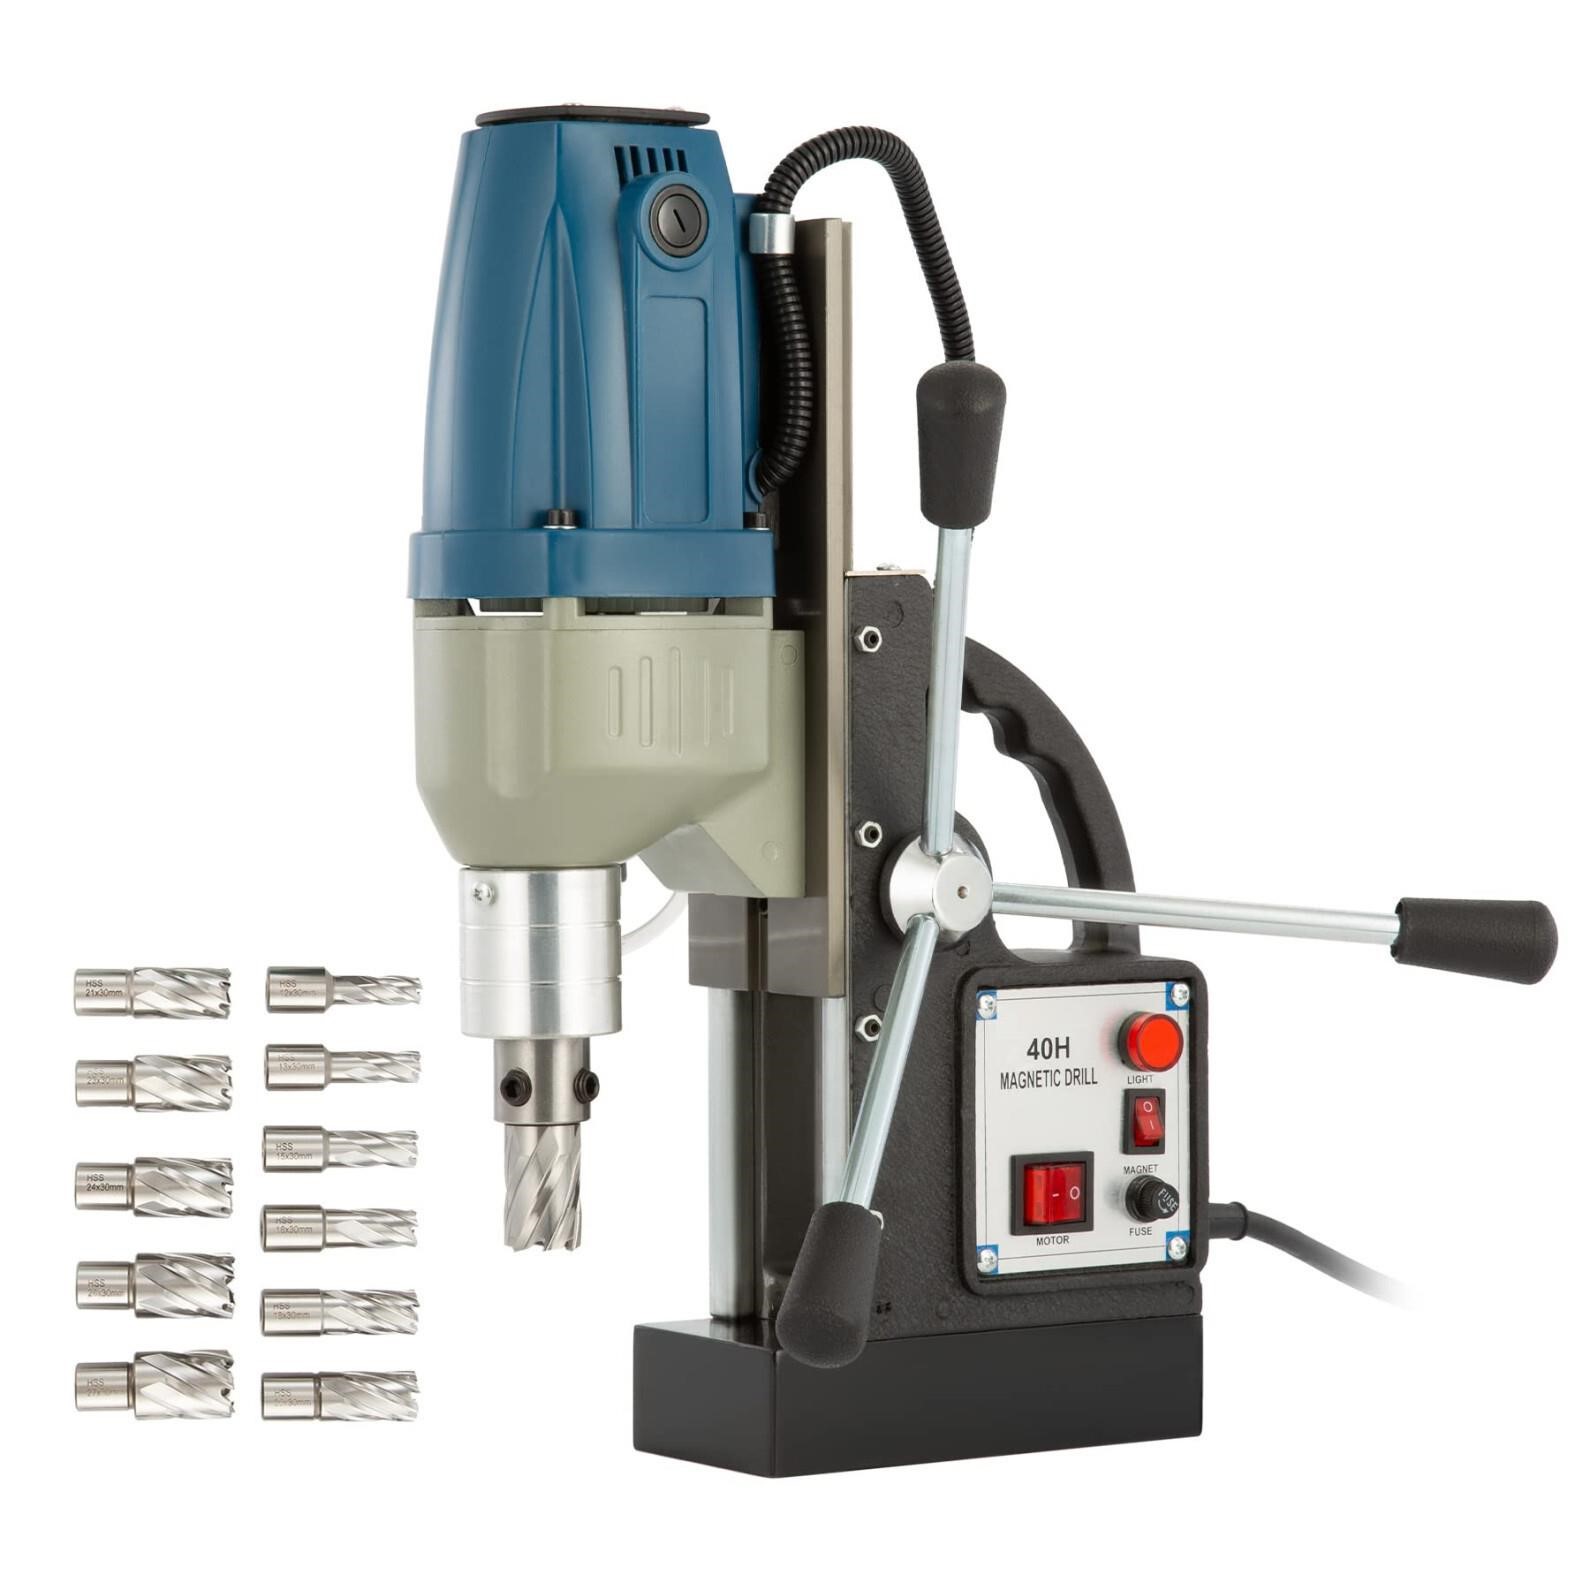 ZELCAN 1550W Electric Magnetic Drill Press w 1.6 i